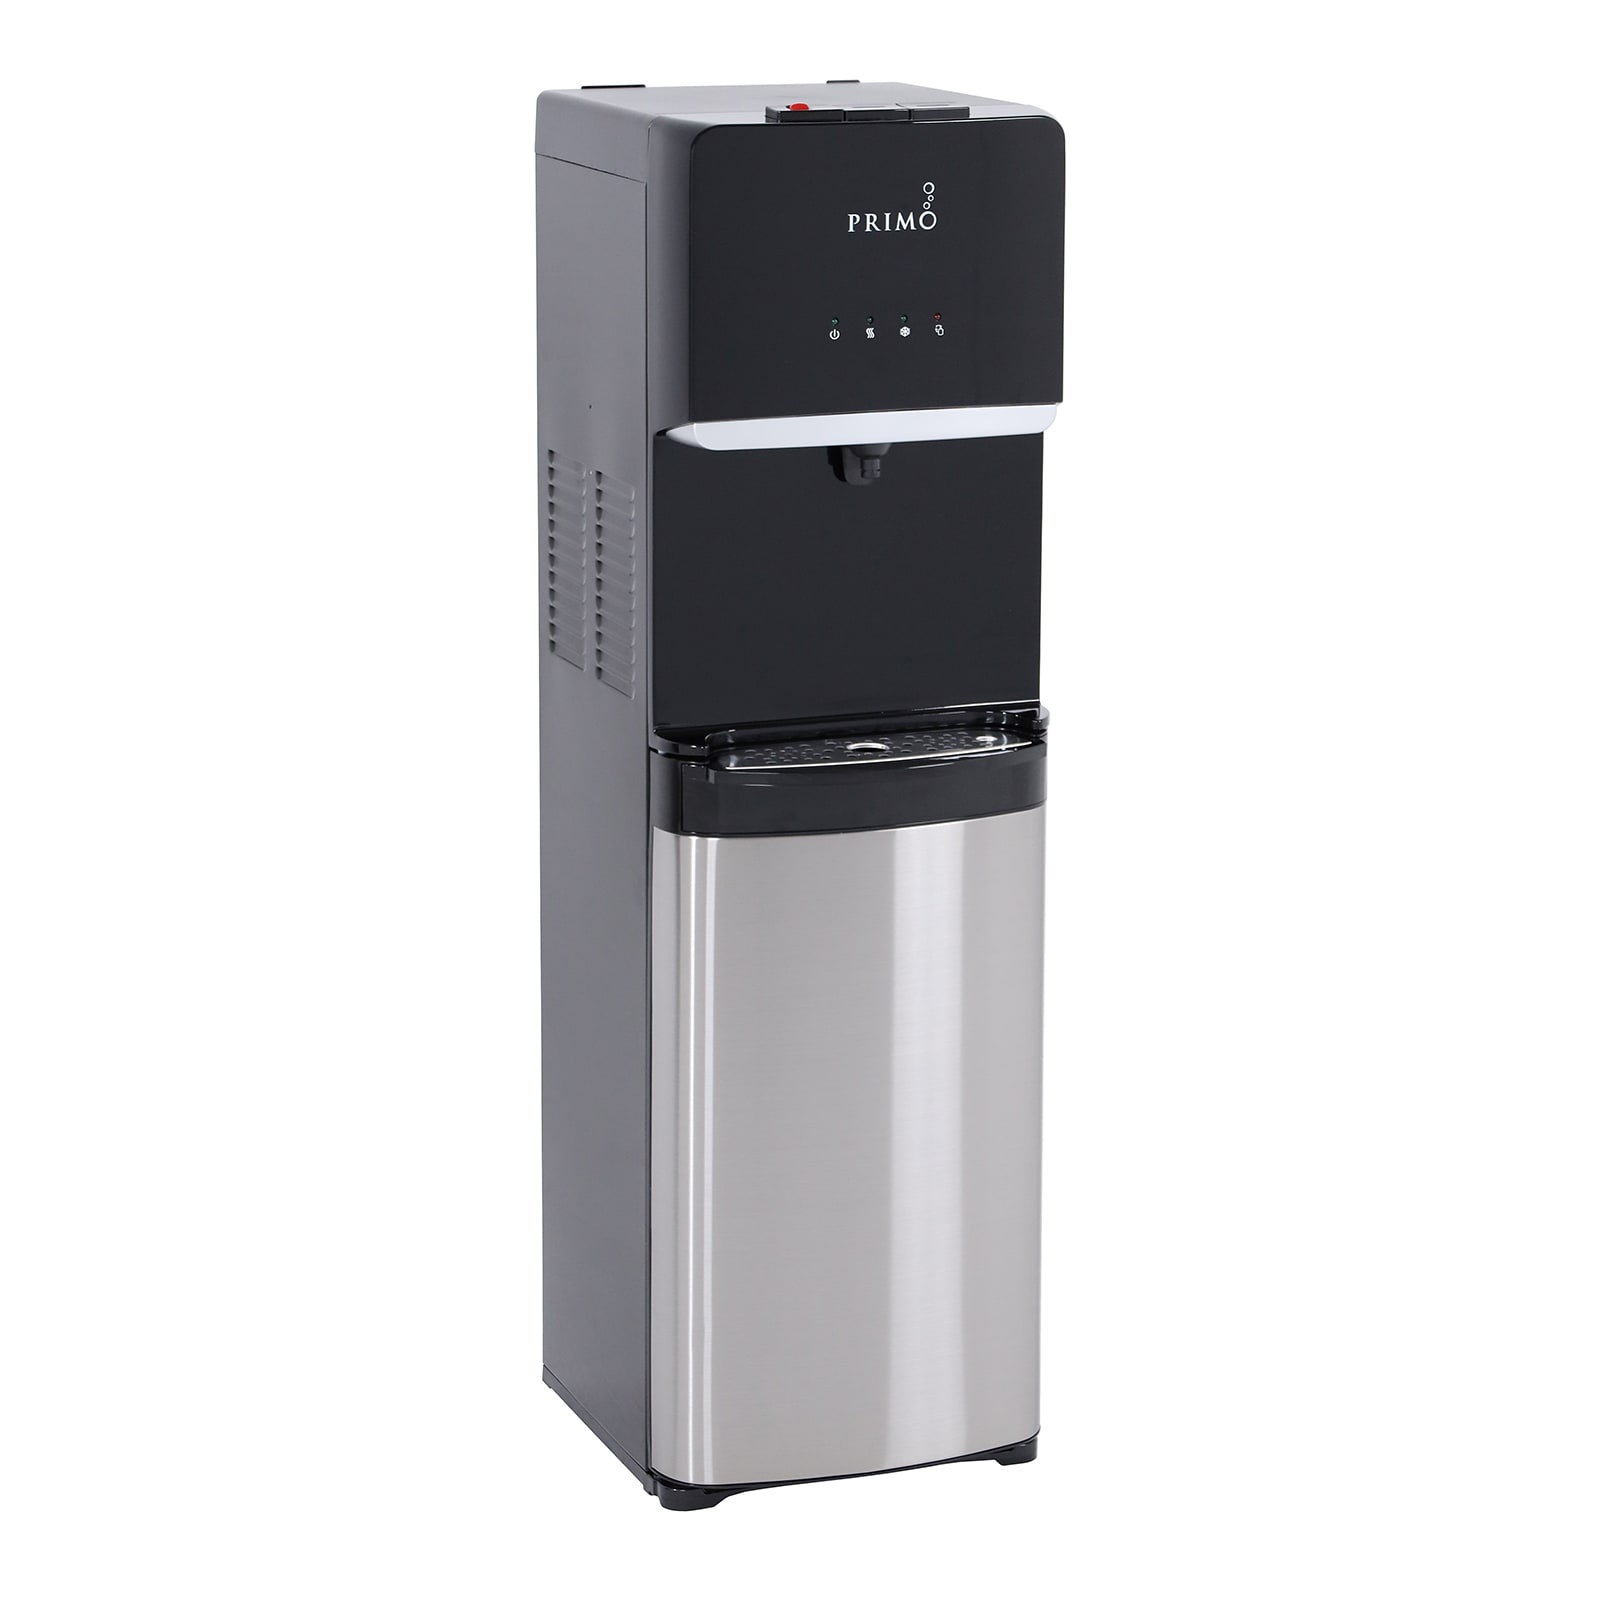 UMOMO Top Loading Water Cooler Dispenser, Countertop, Holds 3 or 5 Gallon,  Hot & Cold, for Home and Office Use, Black(Water Bottle NOT Included)